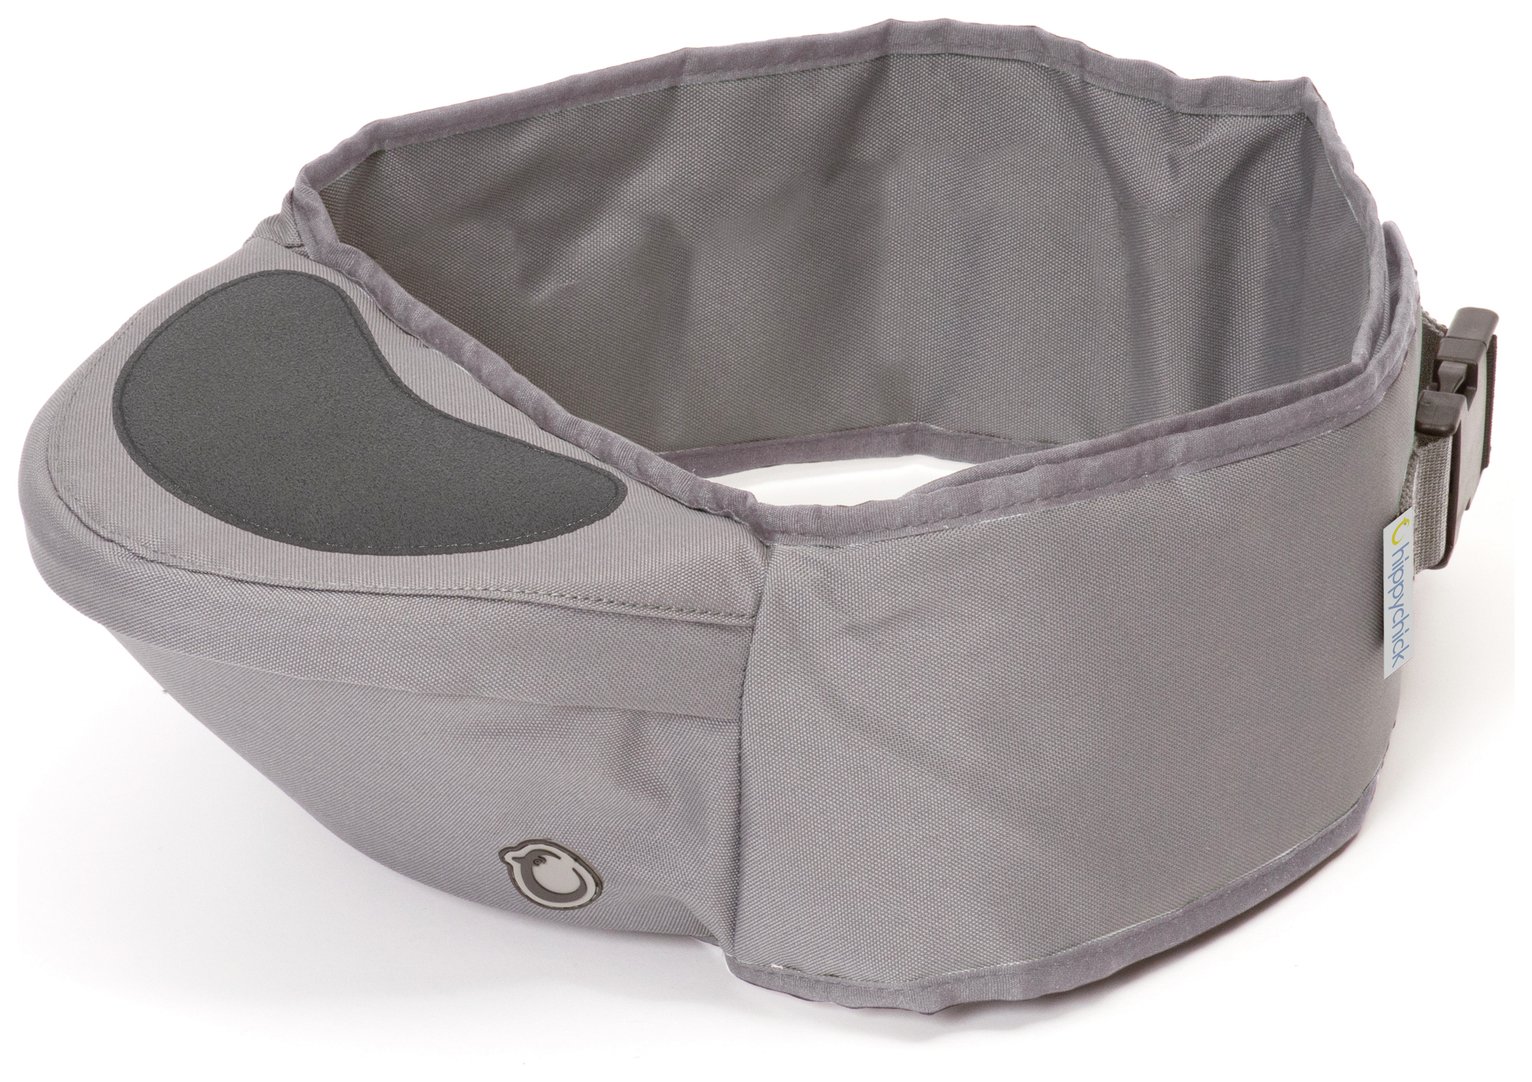 Hippychick Bagged Hipseat - Grey